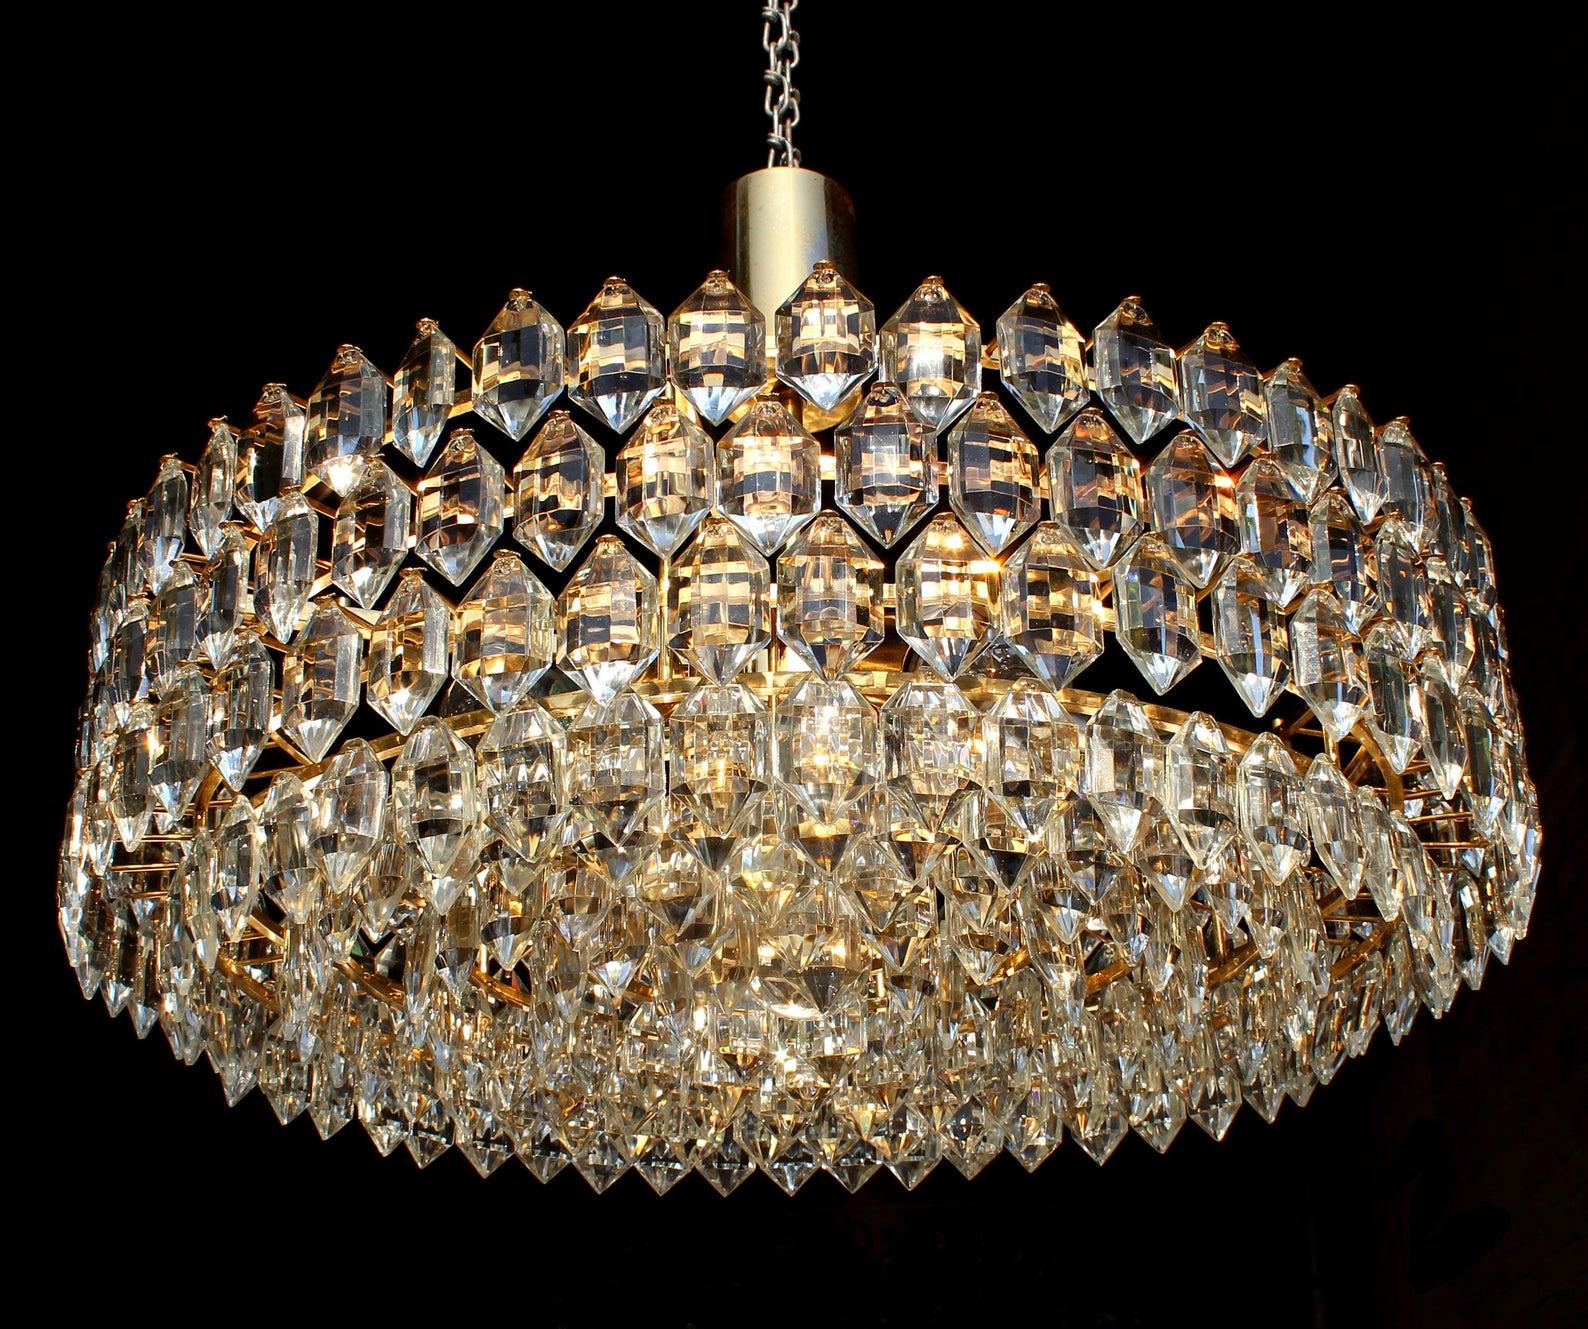 Gilt brass and fine lead crystal chandelier 1970s / Schröder Leuchten / Germany with 7-light (E27) and 303 grand hexagonal crystal ornaments
This fine chandelier of Schröder & Co. Manufacture is a timeless and elegant masterpiece of German